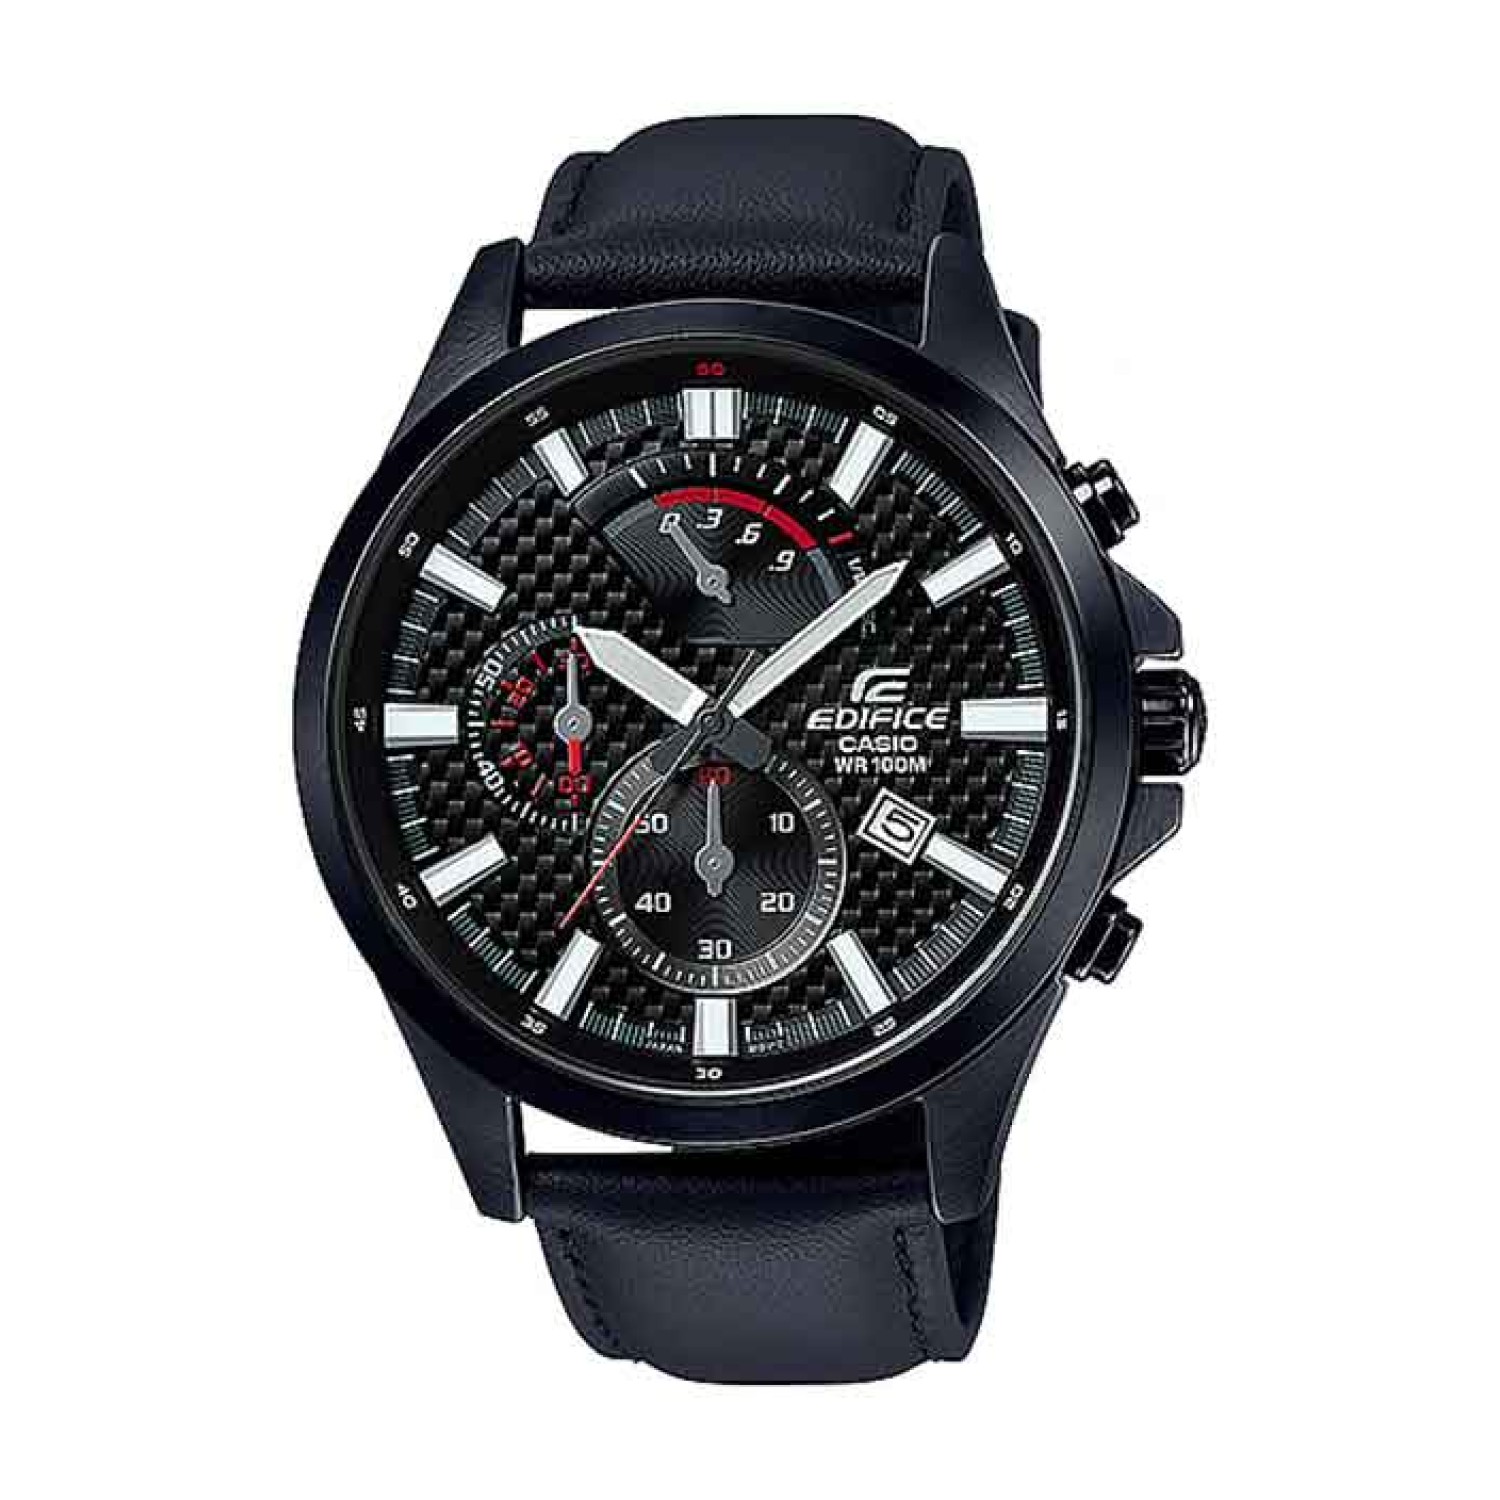 EFV530BL-1A Casio Edifice Chronograph Watch. Introducing a new model EFV530BL-1A Casio Edifice Chronograph Watch  2 Year Casio Guarantee which is only available at authorised New Zealand Casio Stockists. LAYBUY - Pay it easy, in 6 weekly paym casio digita